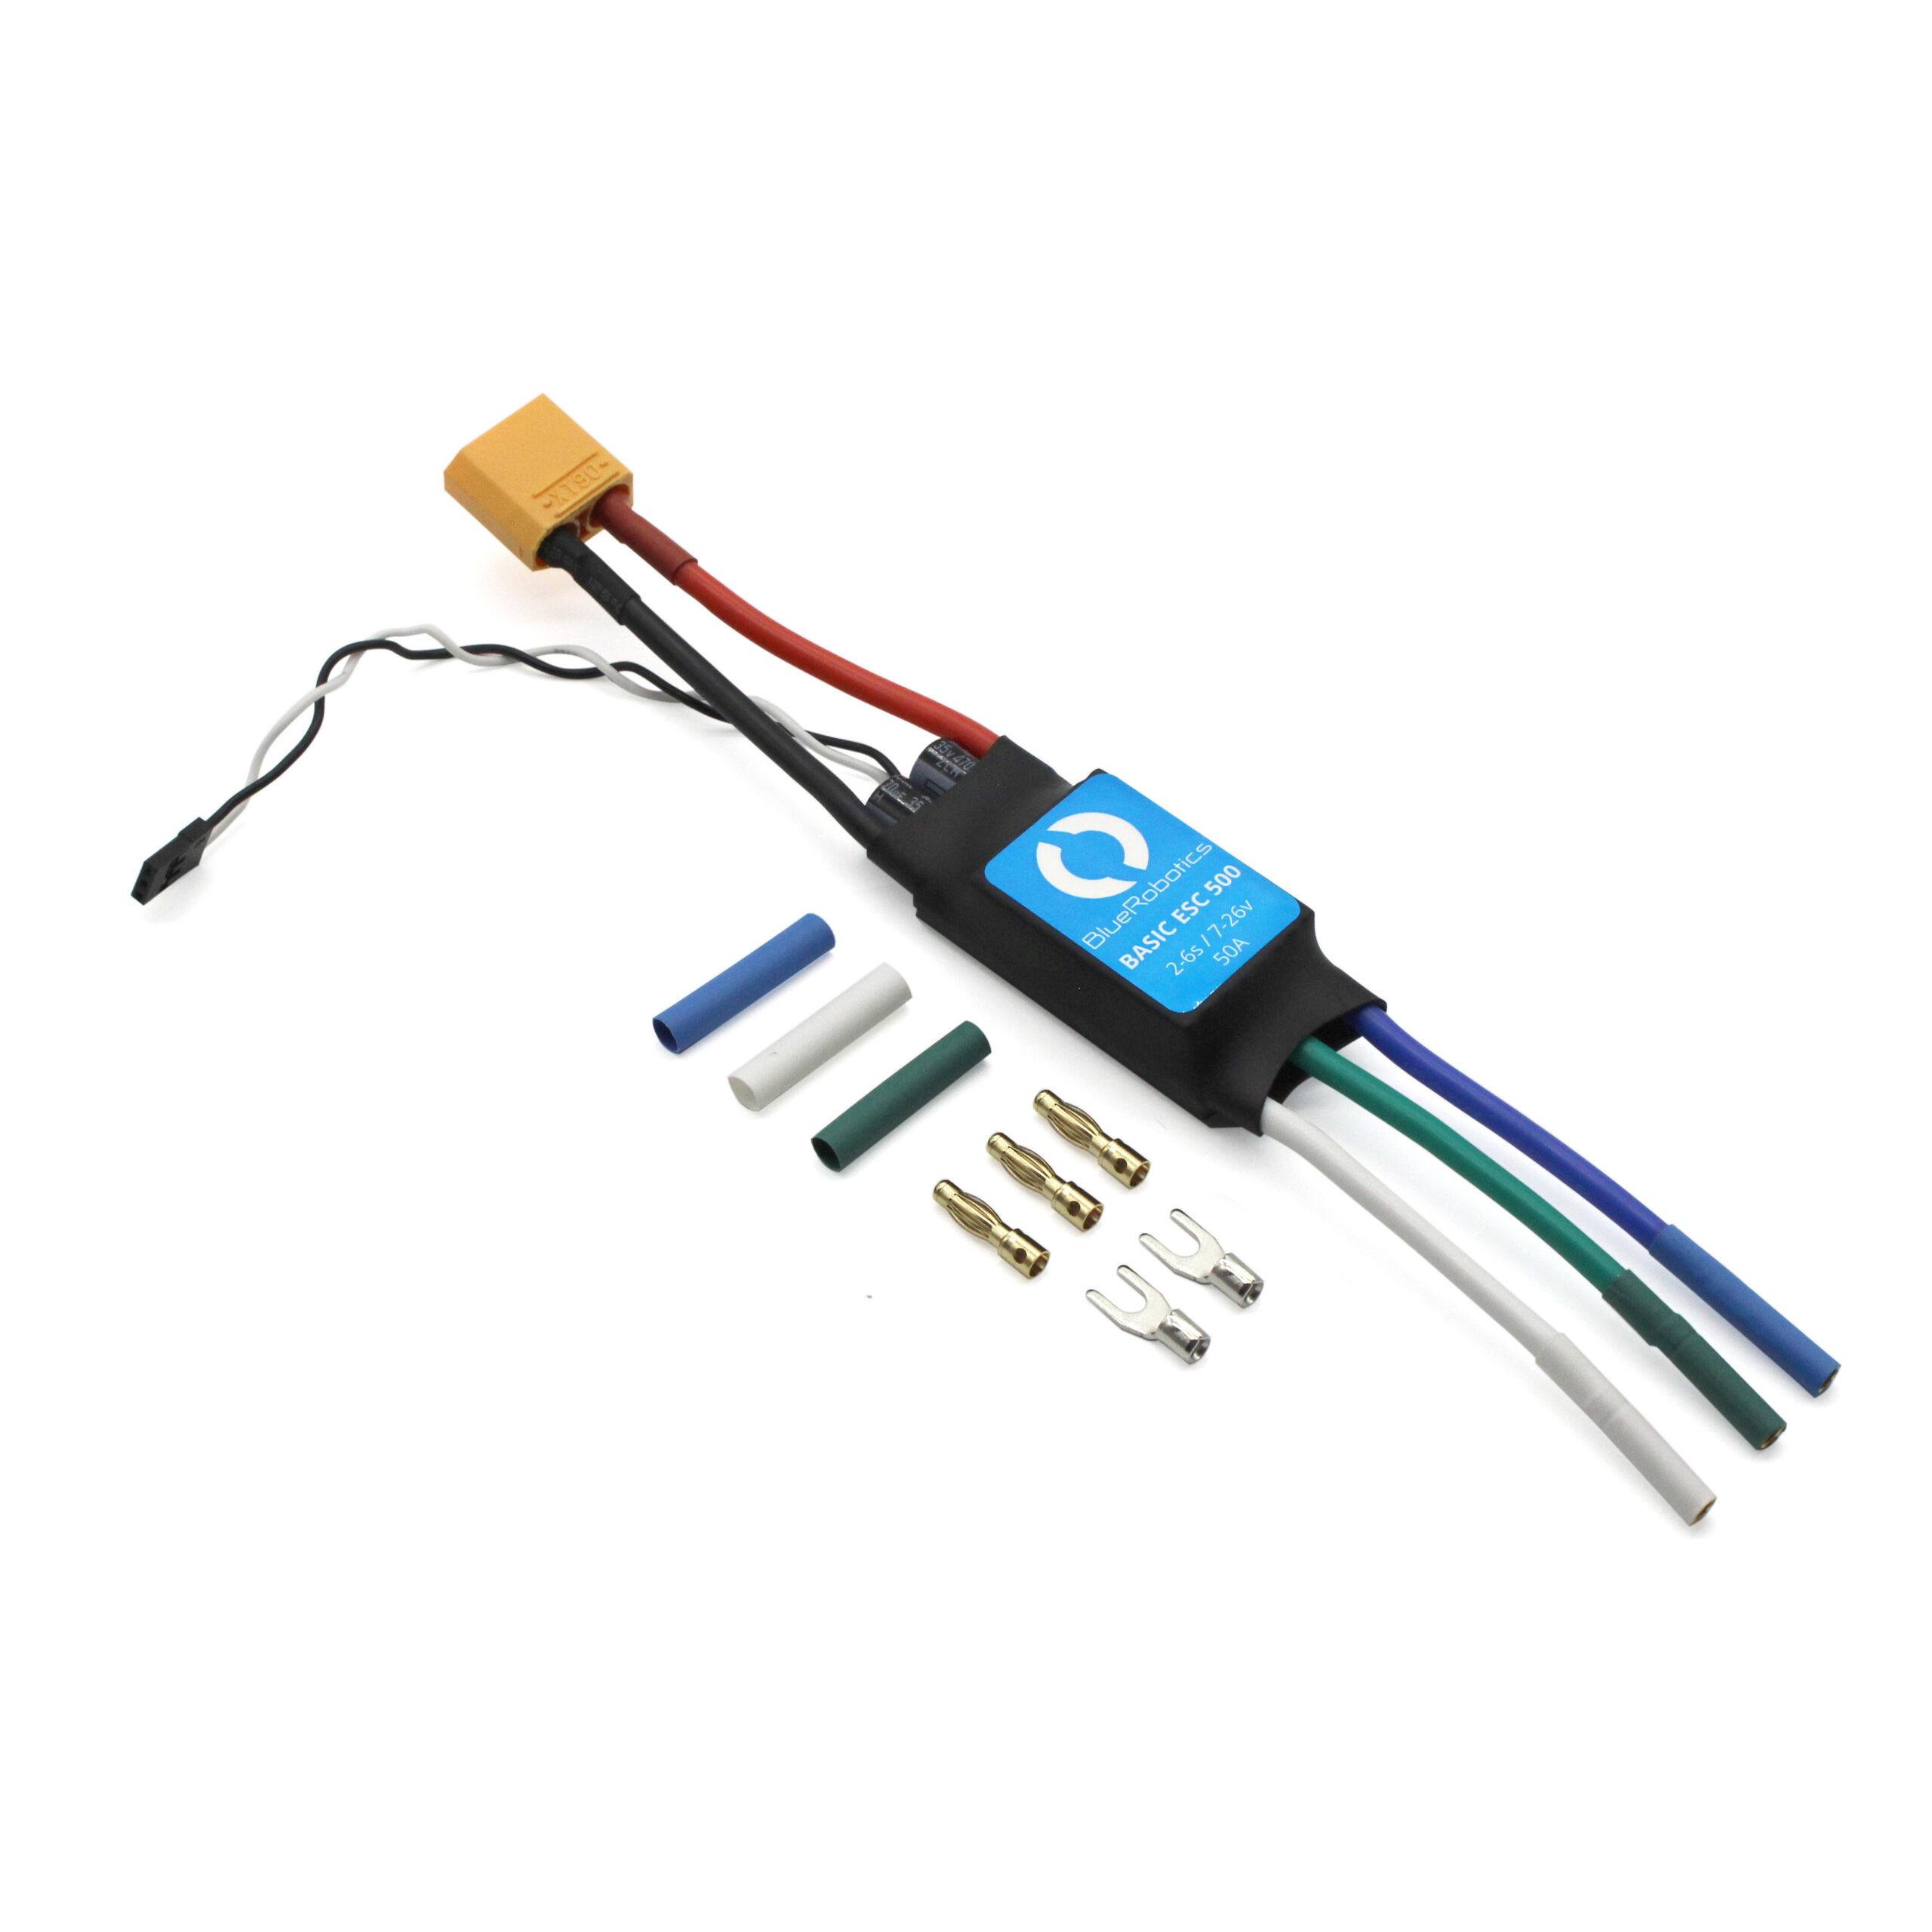 Cosquillas Scully Arco iris Basic ESC 500 (Electronic Speed Controller) for Thrusters and Brushless  Motors